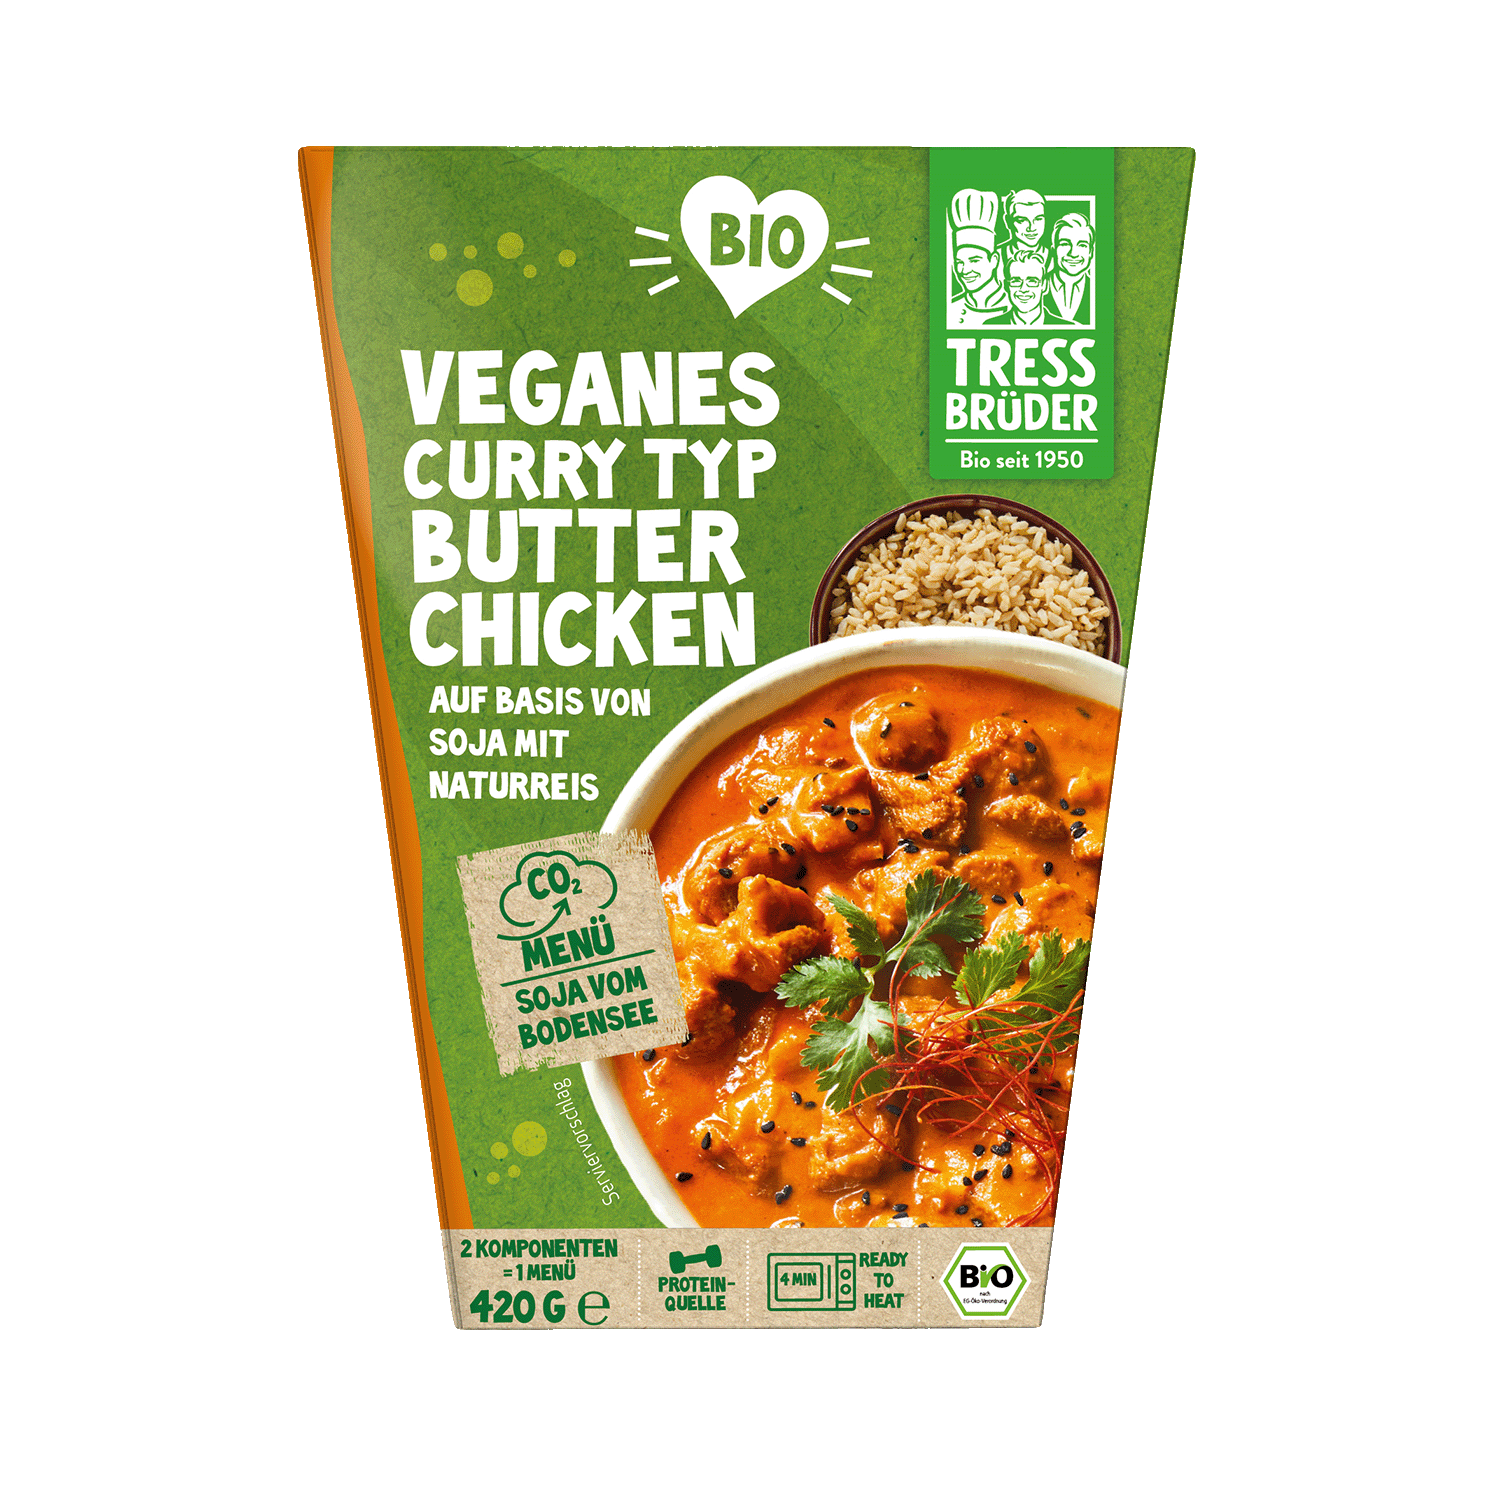 Vegan curry butter chicken based on soya with brown rice, Organic, 420g